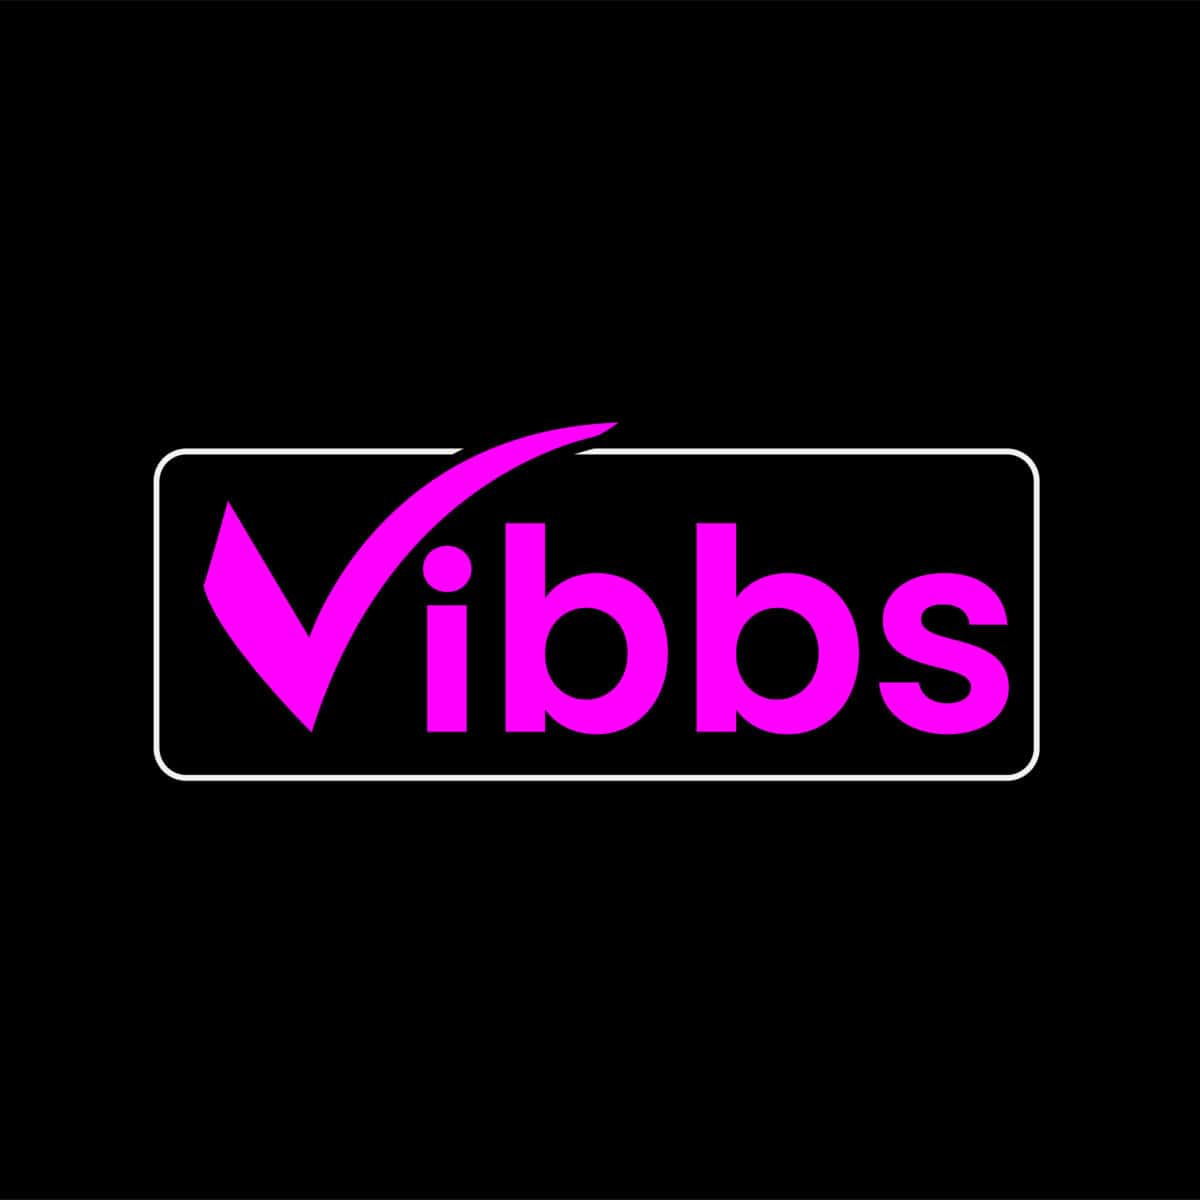 VIBBS Black Business Directory | Search Engine For Black Businesses